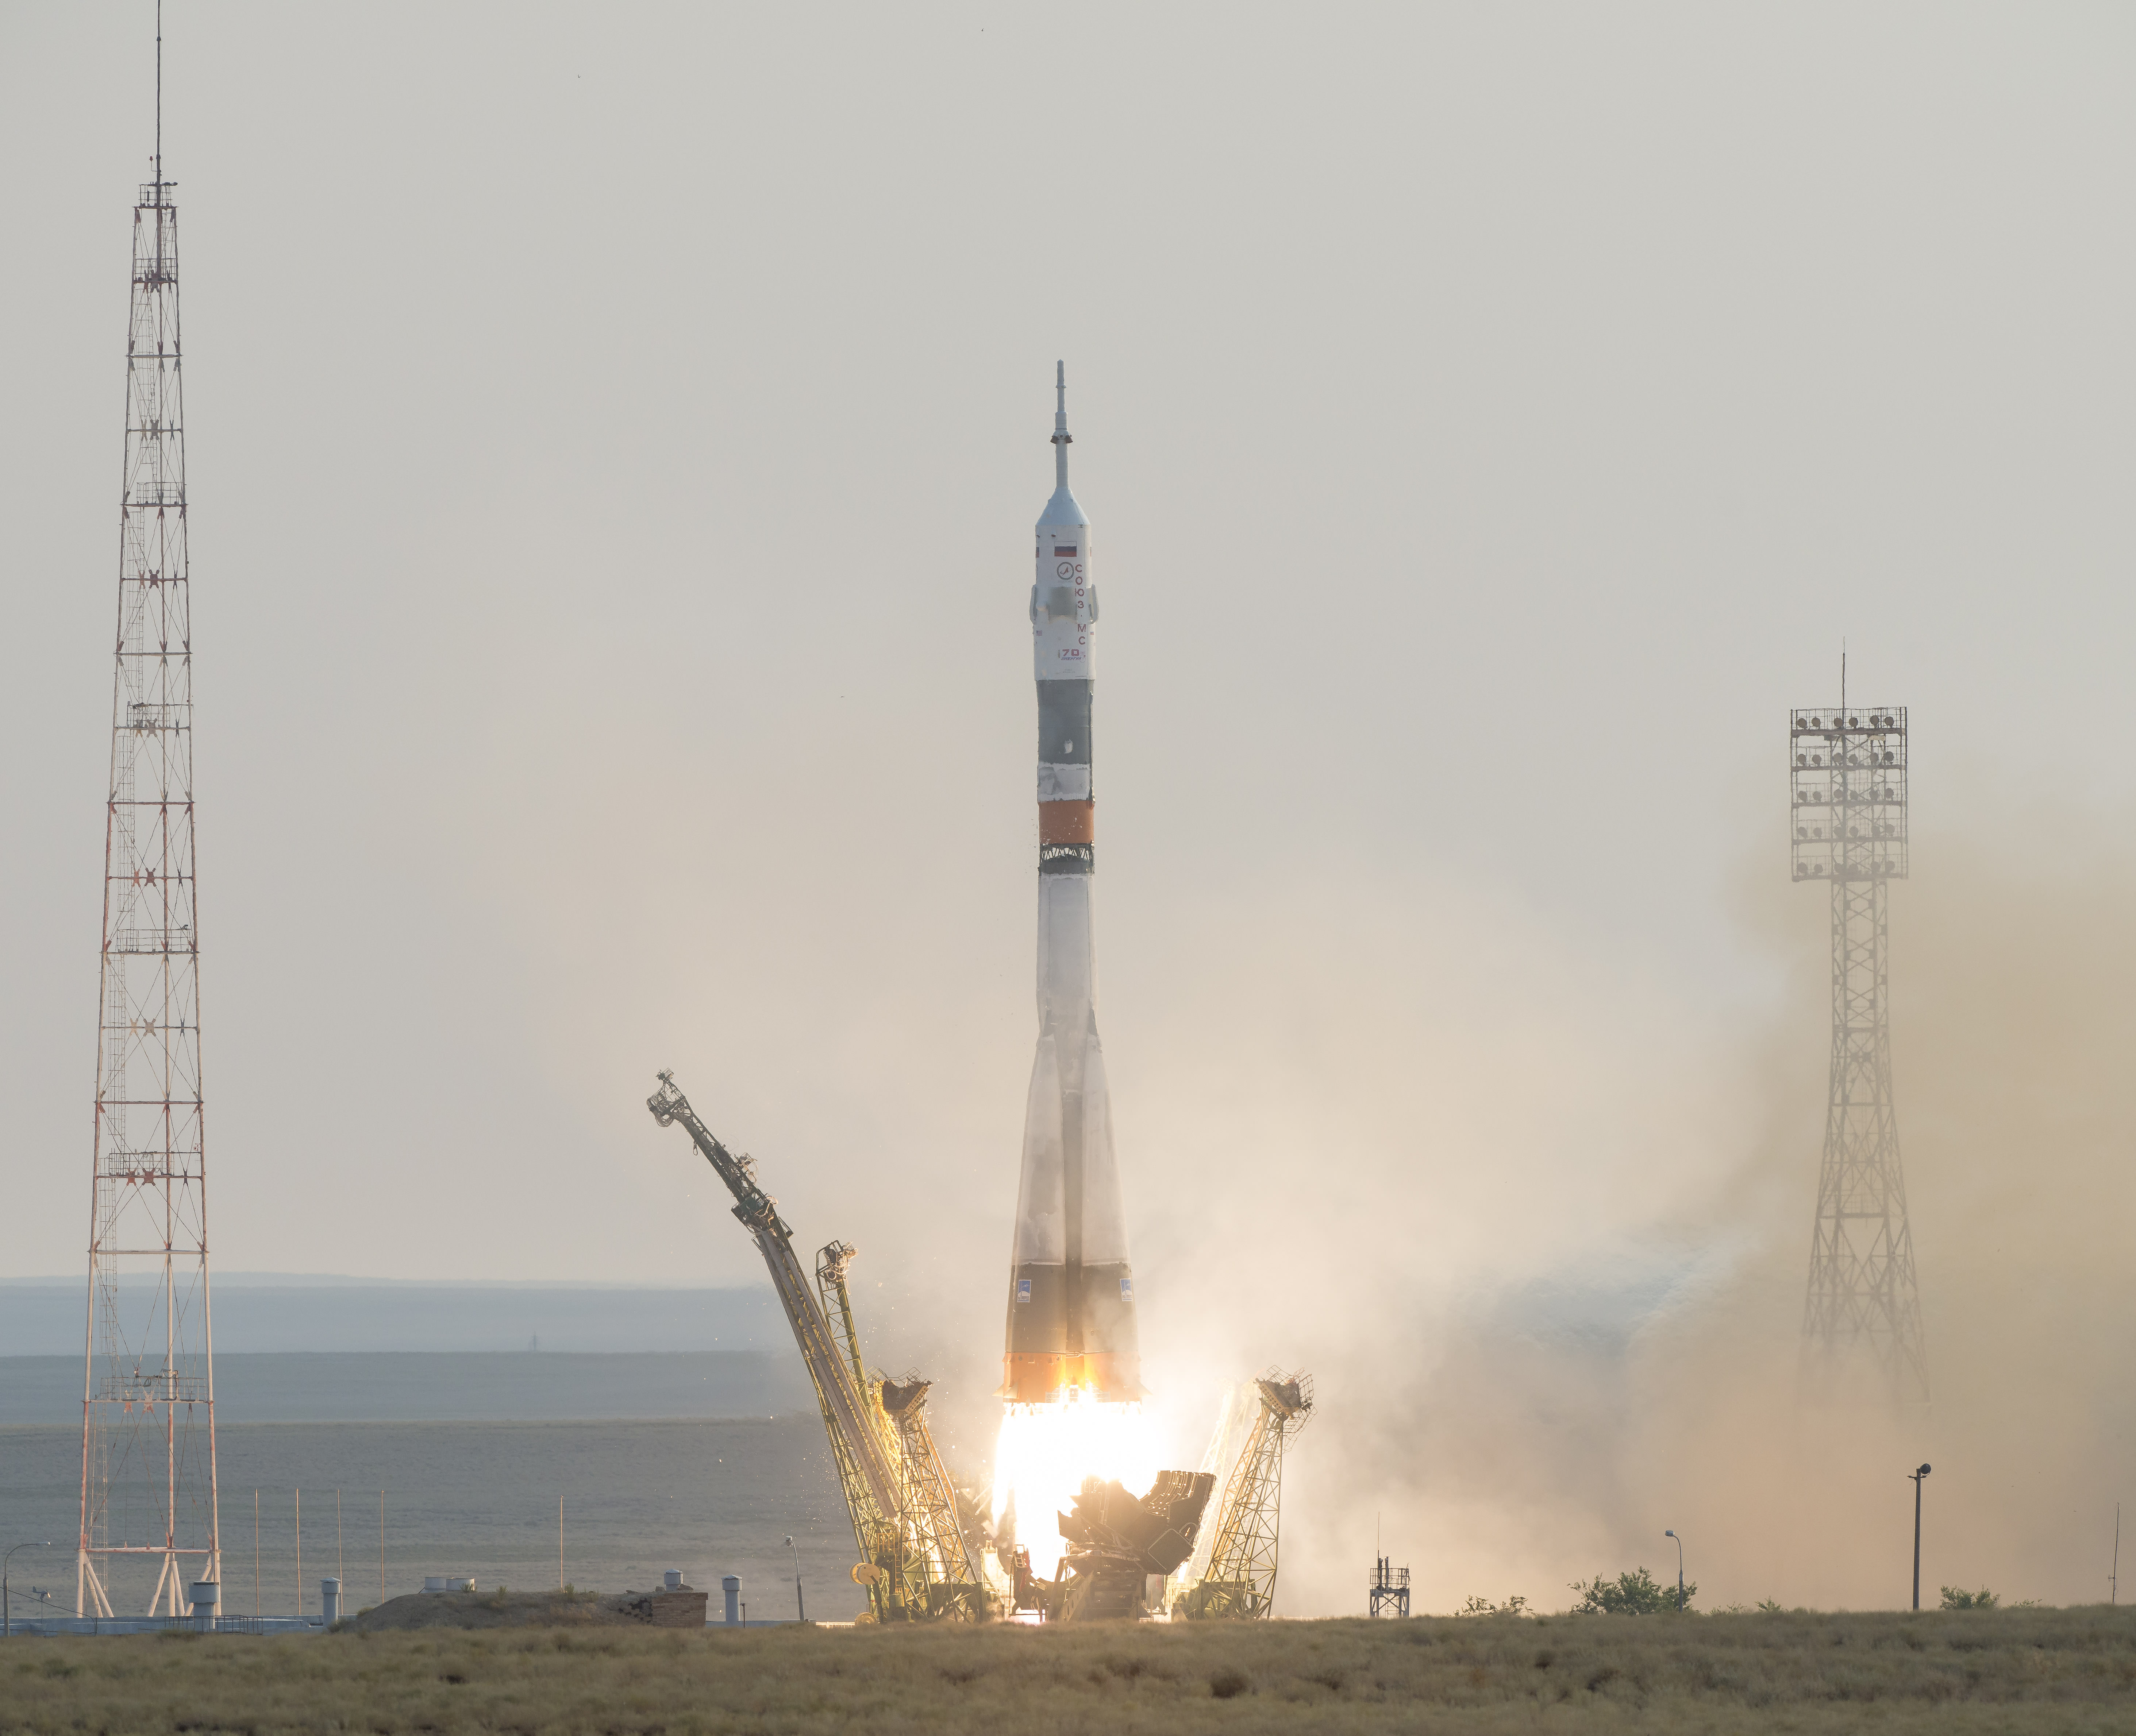 The Soyuz MS-01 spacecraft launches from the Baikonur Cosmodrome with Expedition 48-49 crewmembers Kate Rubins of NASA, Anatoly Ivanishin of Roscosmos and Takuya Onishi of the Japan Aerospace Exploration Agency (JAXA) onboard, Thursday, July 7, 2016 , Kazakh time (July 6 Eastern time), Baikonur, Kazakhstan. Rubins, Ivanishin, and Onishi will spend approximately four months on the orbital complex, returning to Earth in October. Photo Credit: NASA/Bill Ingalls